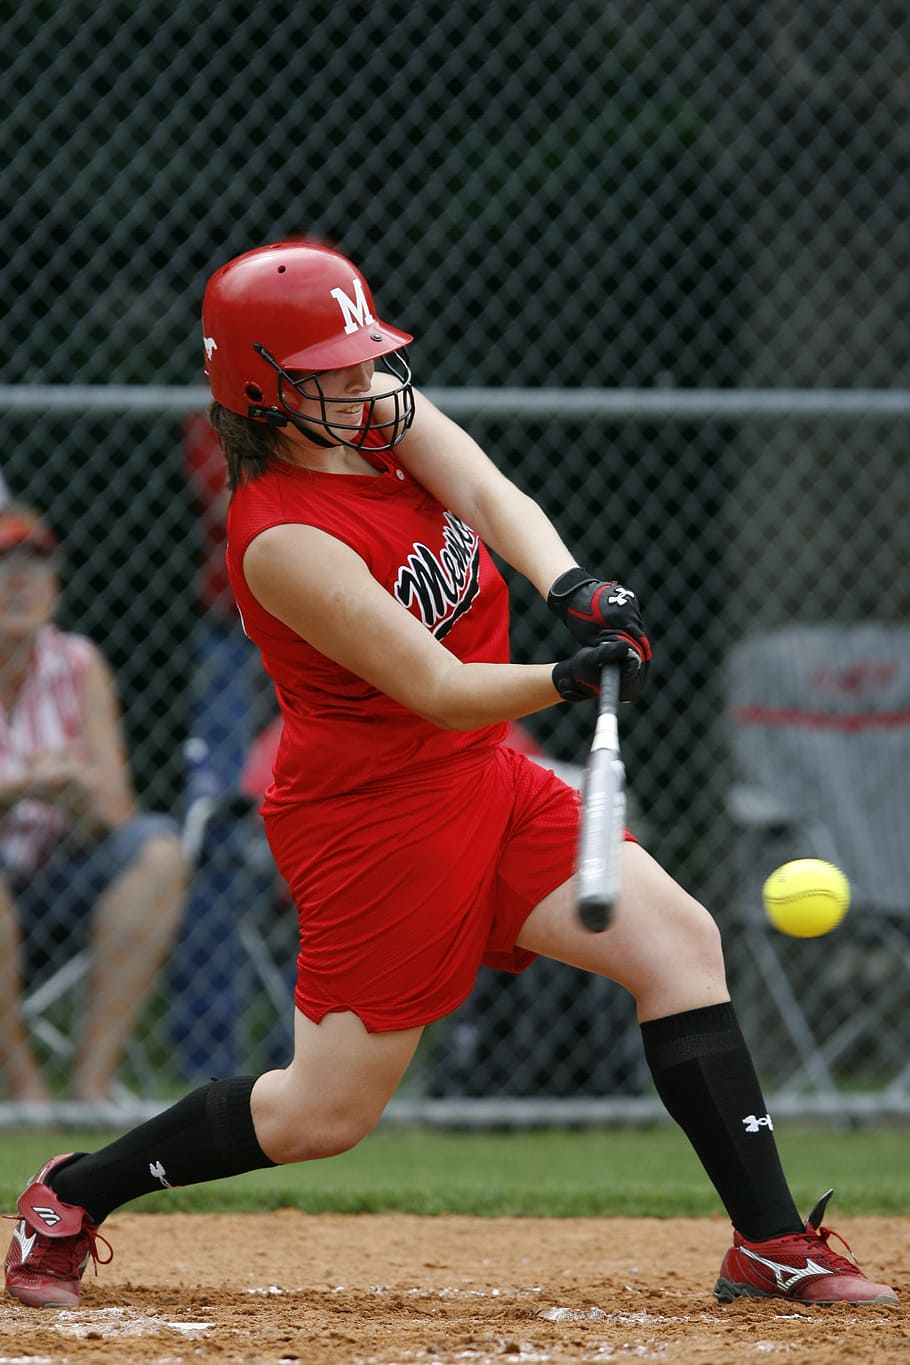 softball, player, game, competition, bat, play, athlete, ball, teen, field